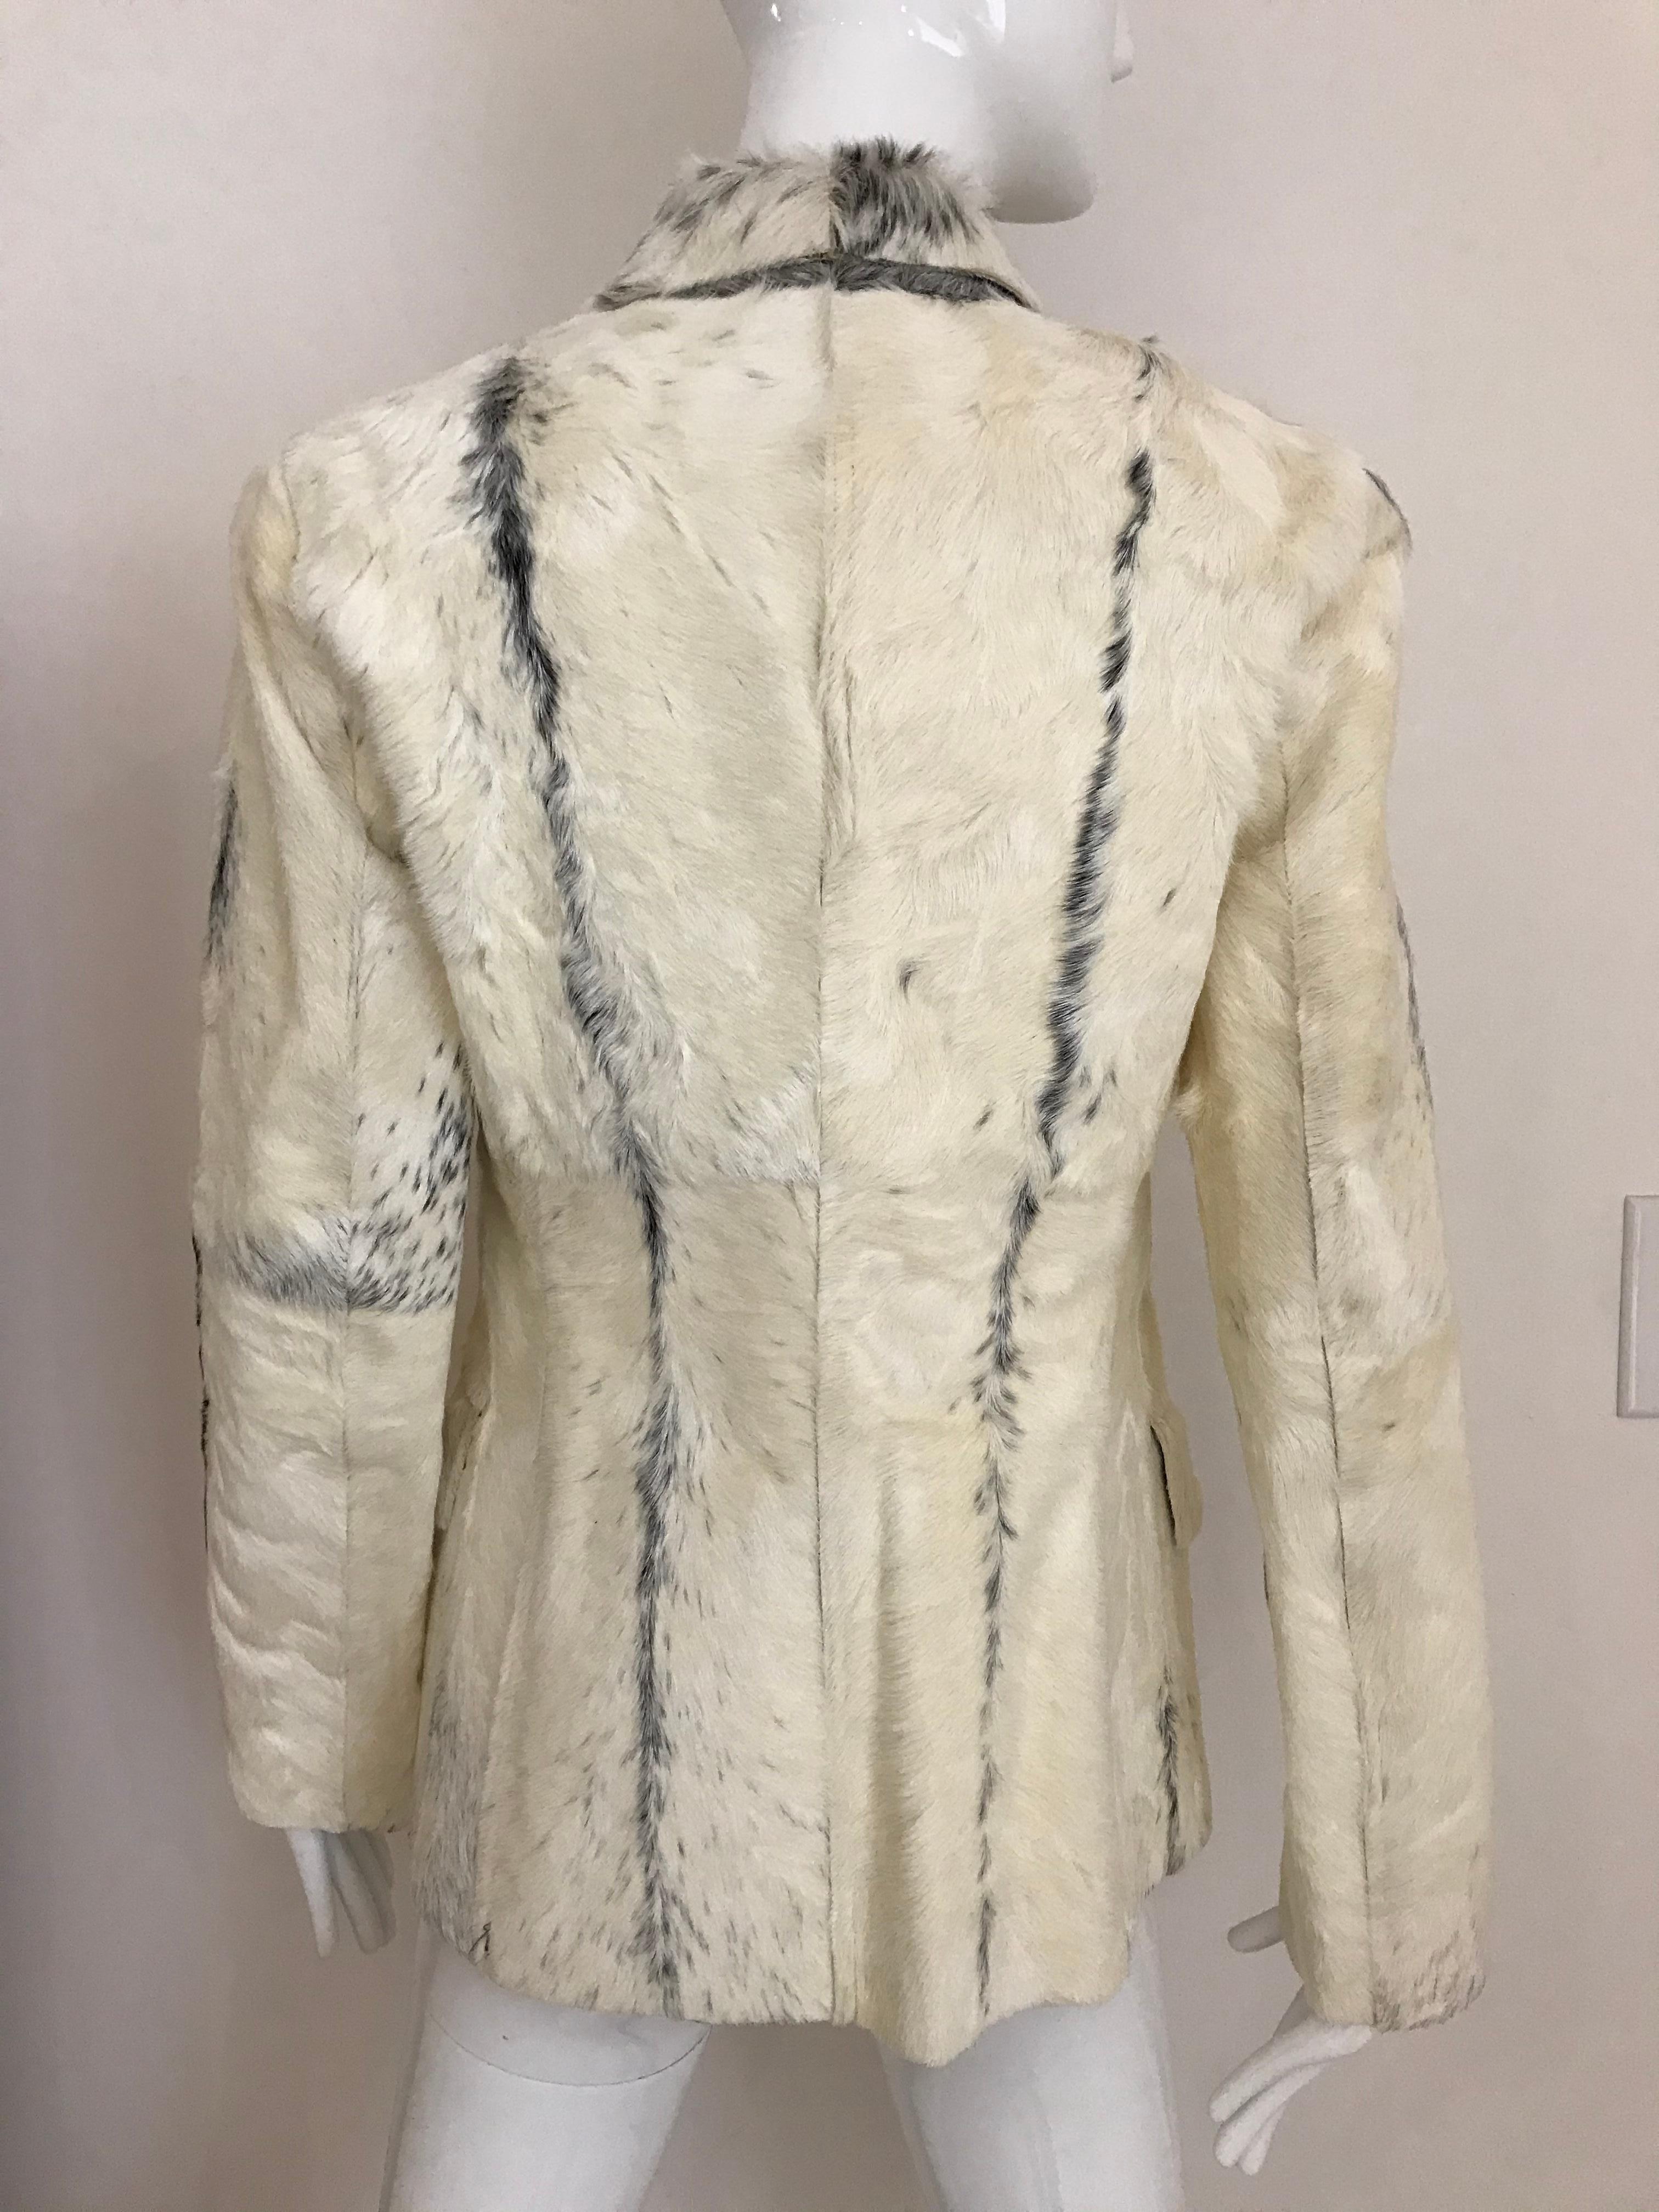 Gucci by Tom Ford era fitted pony hair jacket.  
Fit size 2 or 4 max.
Measurement: Bust: 34 inches/ Waist: 30 inches/ Hip: 32 inches/ Length: 25 inches
Sleeve: 24 inches